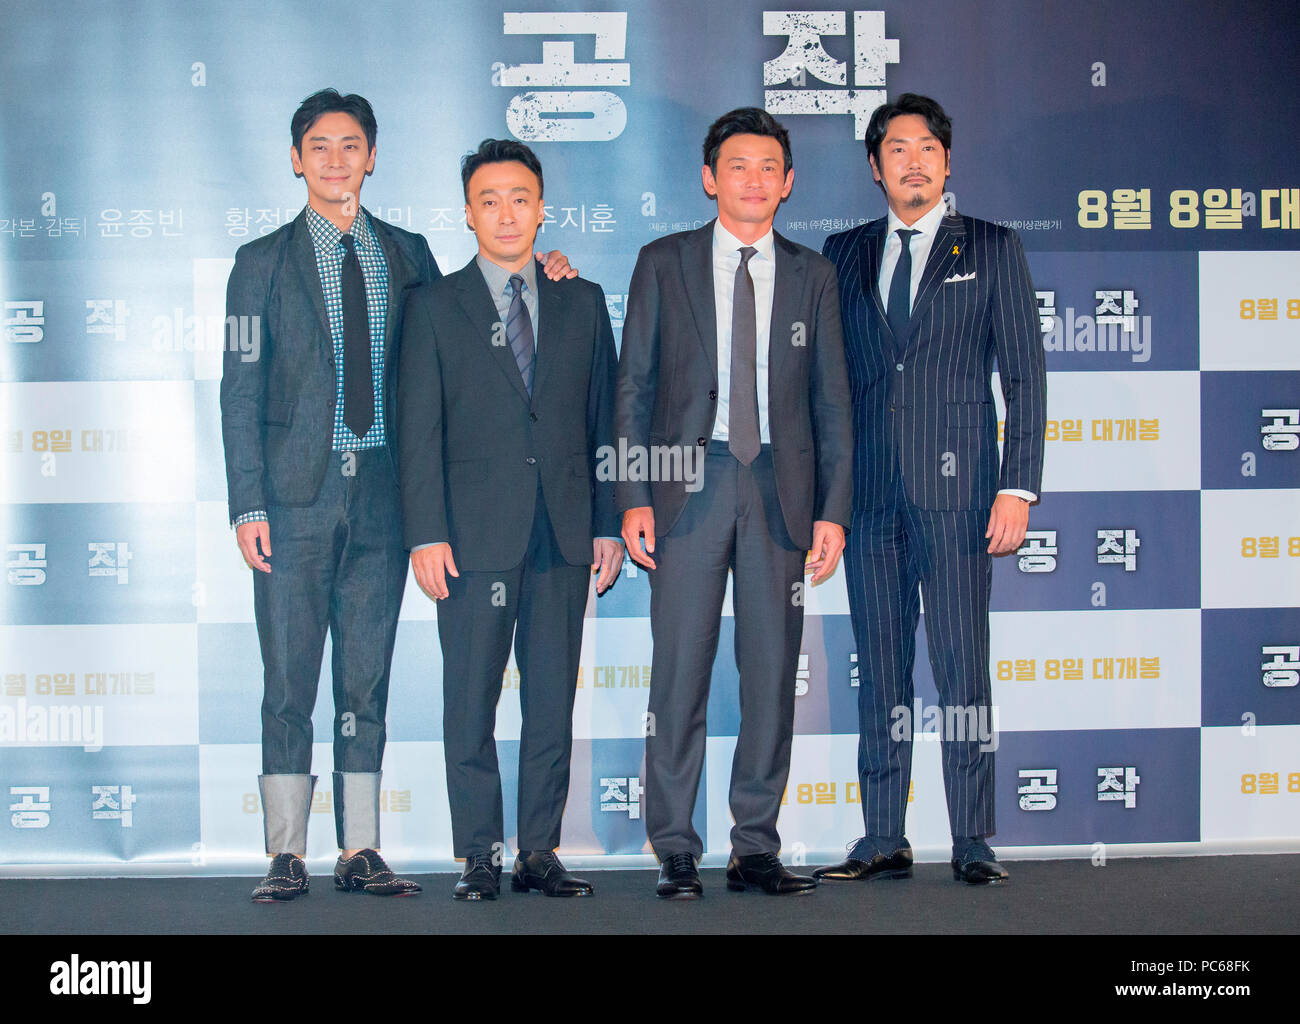 Ju Ji-Hoon, Lee Sung-Min, Hwang Jung-Min and Cho Jin-Woong, July 31, 2018 : Cast members (L-R) Ju Ji-Hoon, Lee Sung-Min, Hwang Jung-Min and Cho Jin-Woong pose at a press conference for their new film 'The Spy Gone North' at a theatre in Seoul, South Korea. The spy film tells the story of a South Korean spy who goes undercover as a businessman in North Korea in the 1990s to infiltrate North's nuclear facilities using the codename 'Black Venus'. Credit: Lee Jae-Won/AFLO/Alamy Live News Stock Photo